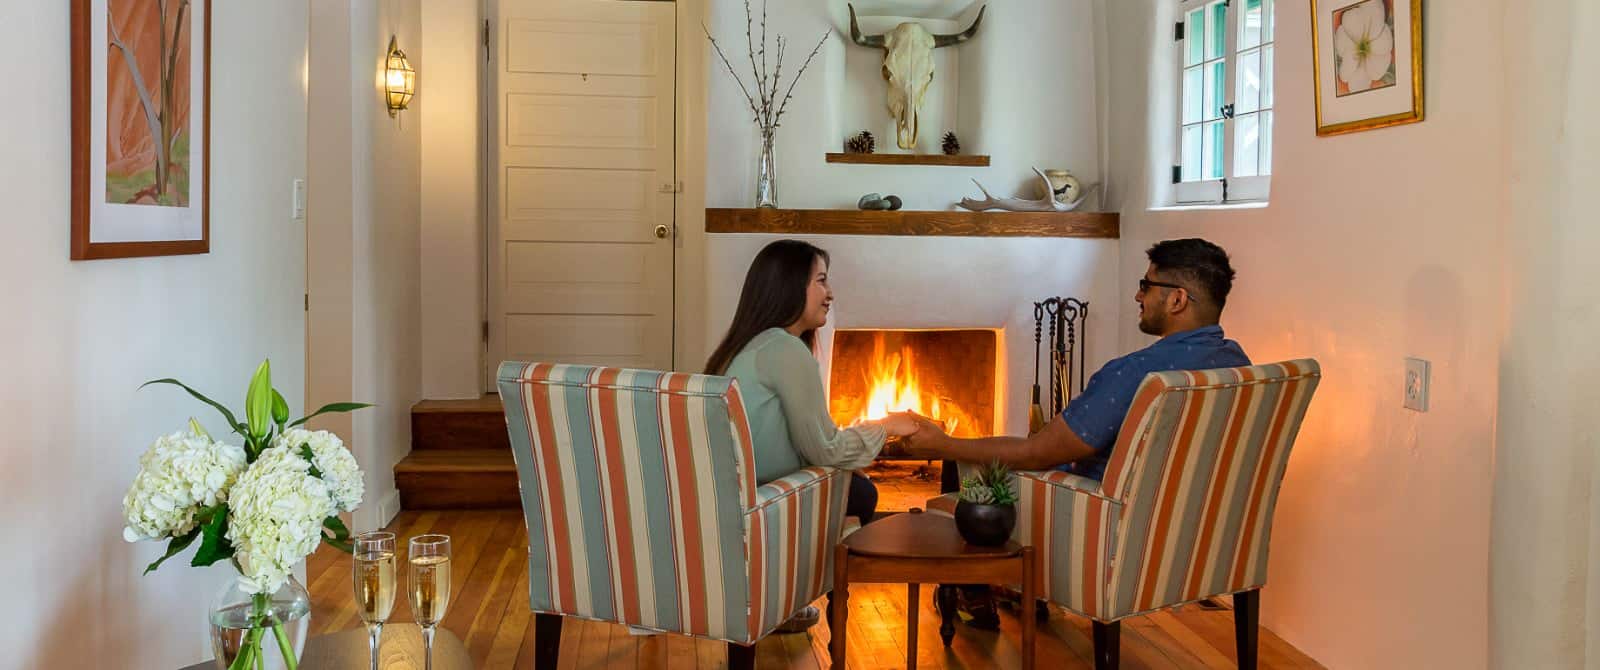 Couple sitting in two striped armchairs, holding hands over a mid-century end table in front of a southwestern-style plastered fireplace.